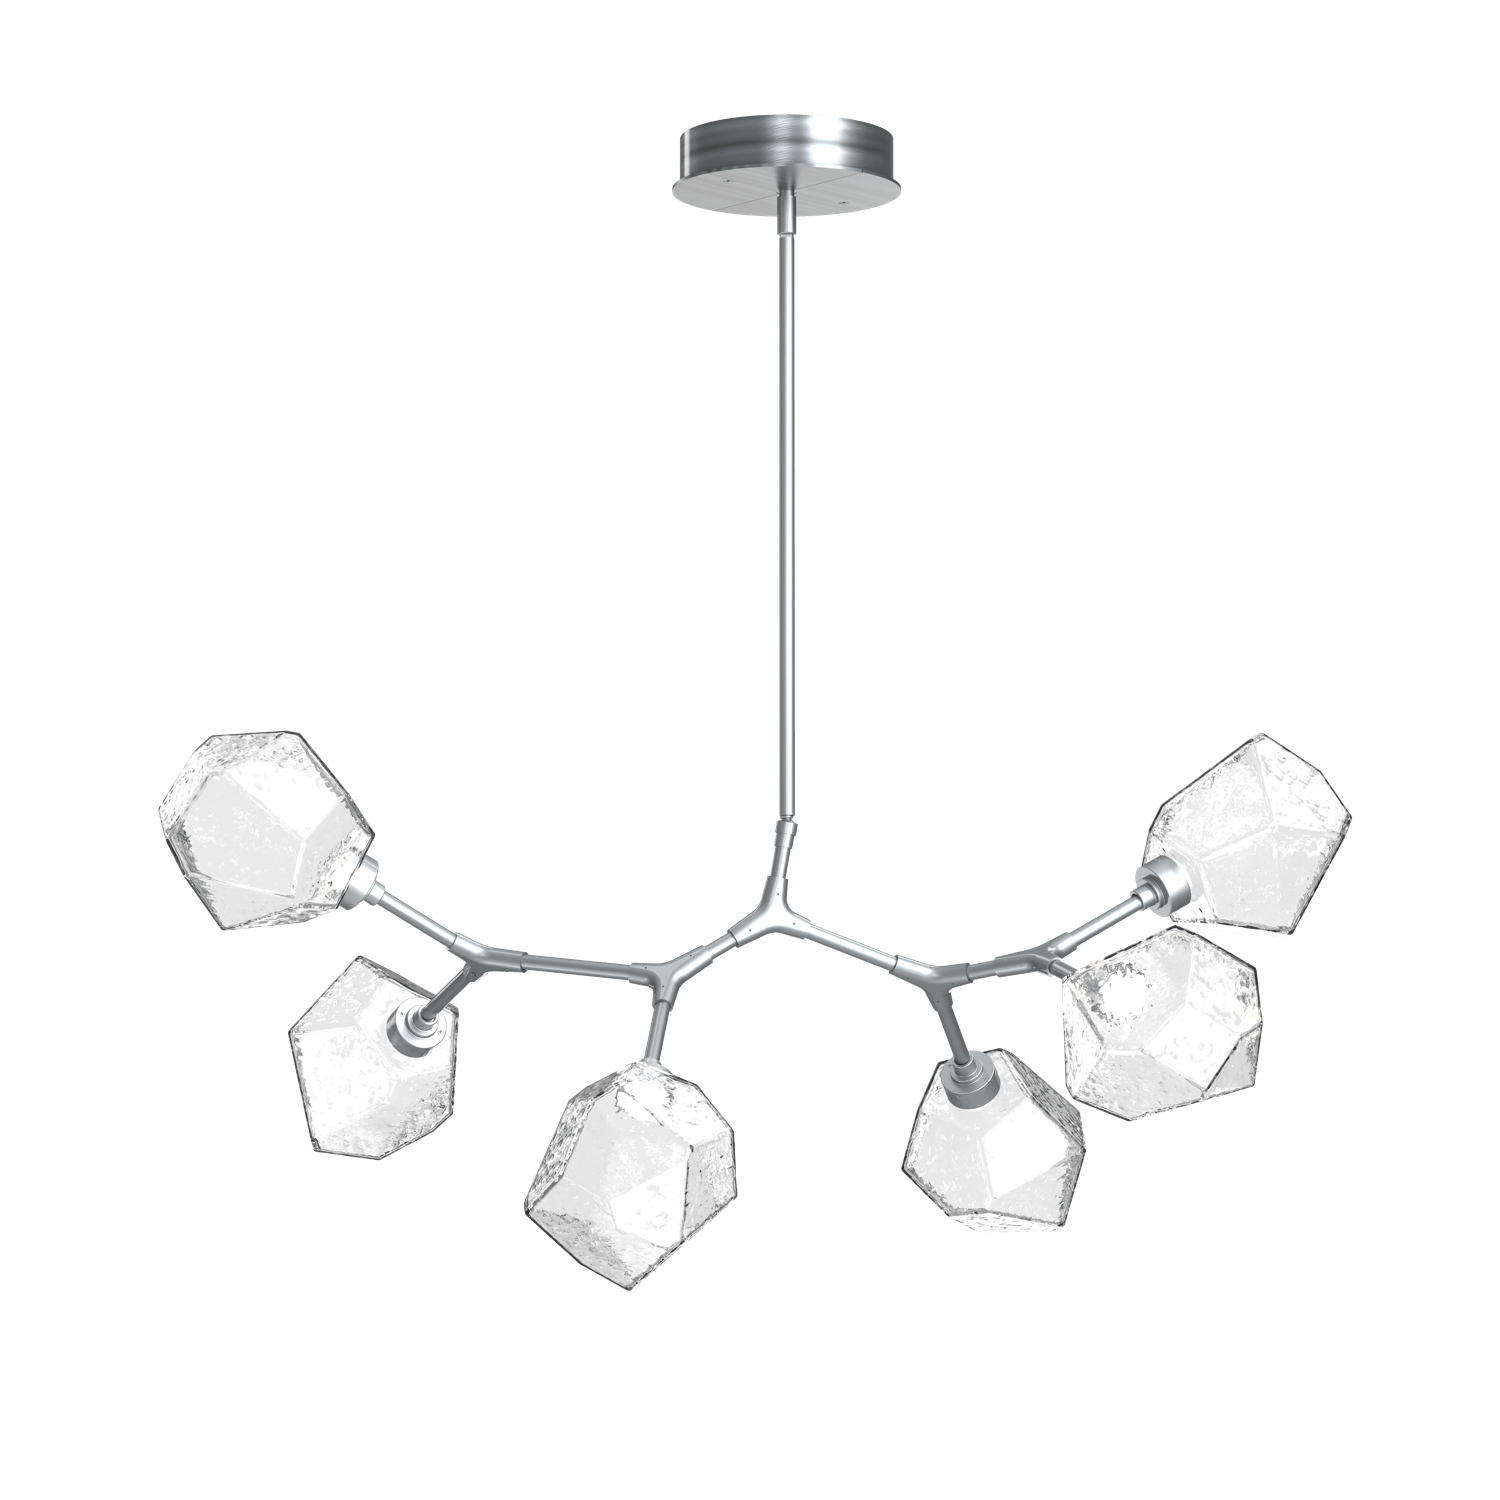 PLB0039-BA-SN-C-Hammerton-Studio-Gem-6-light-modern-branch-chandelier-with-satin-nickel-finish-and-clear-blown-glass-shades-and-LED-lamping